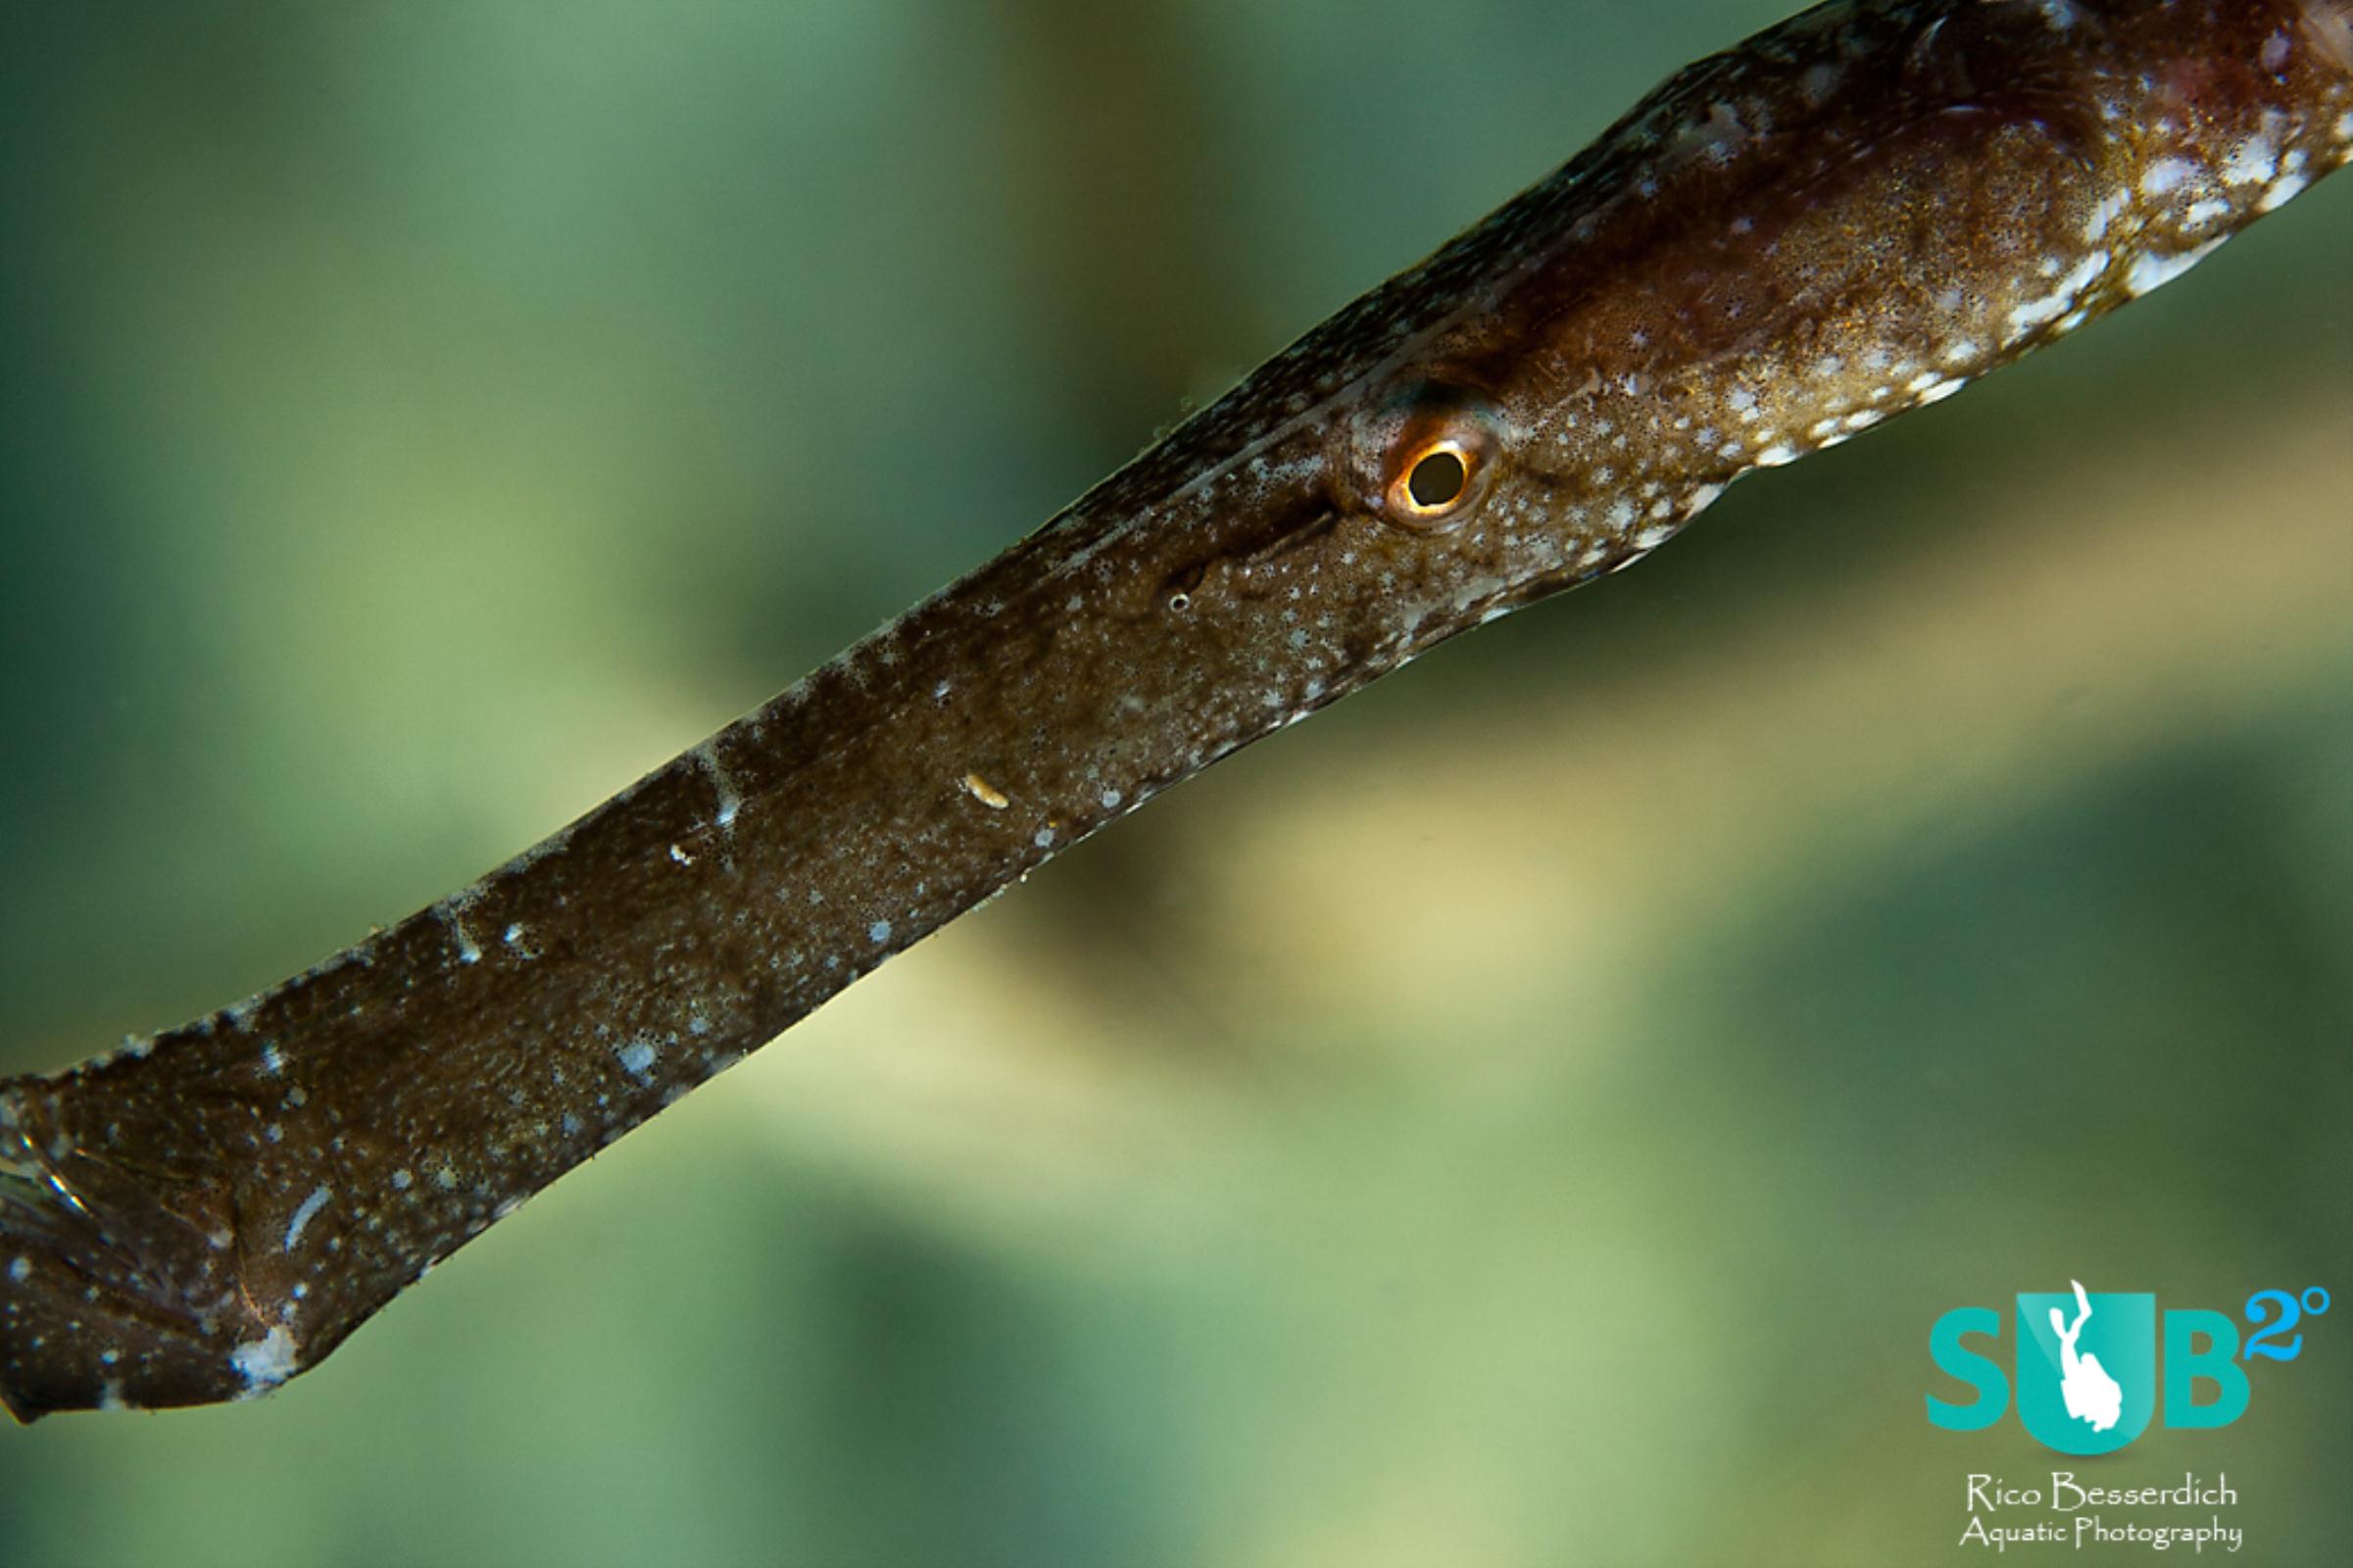 This image could work as a fish portrait shot but sadly the mouth of this pipe-fish is cut. 